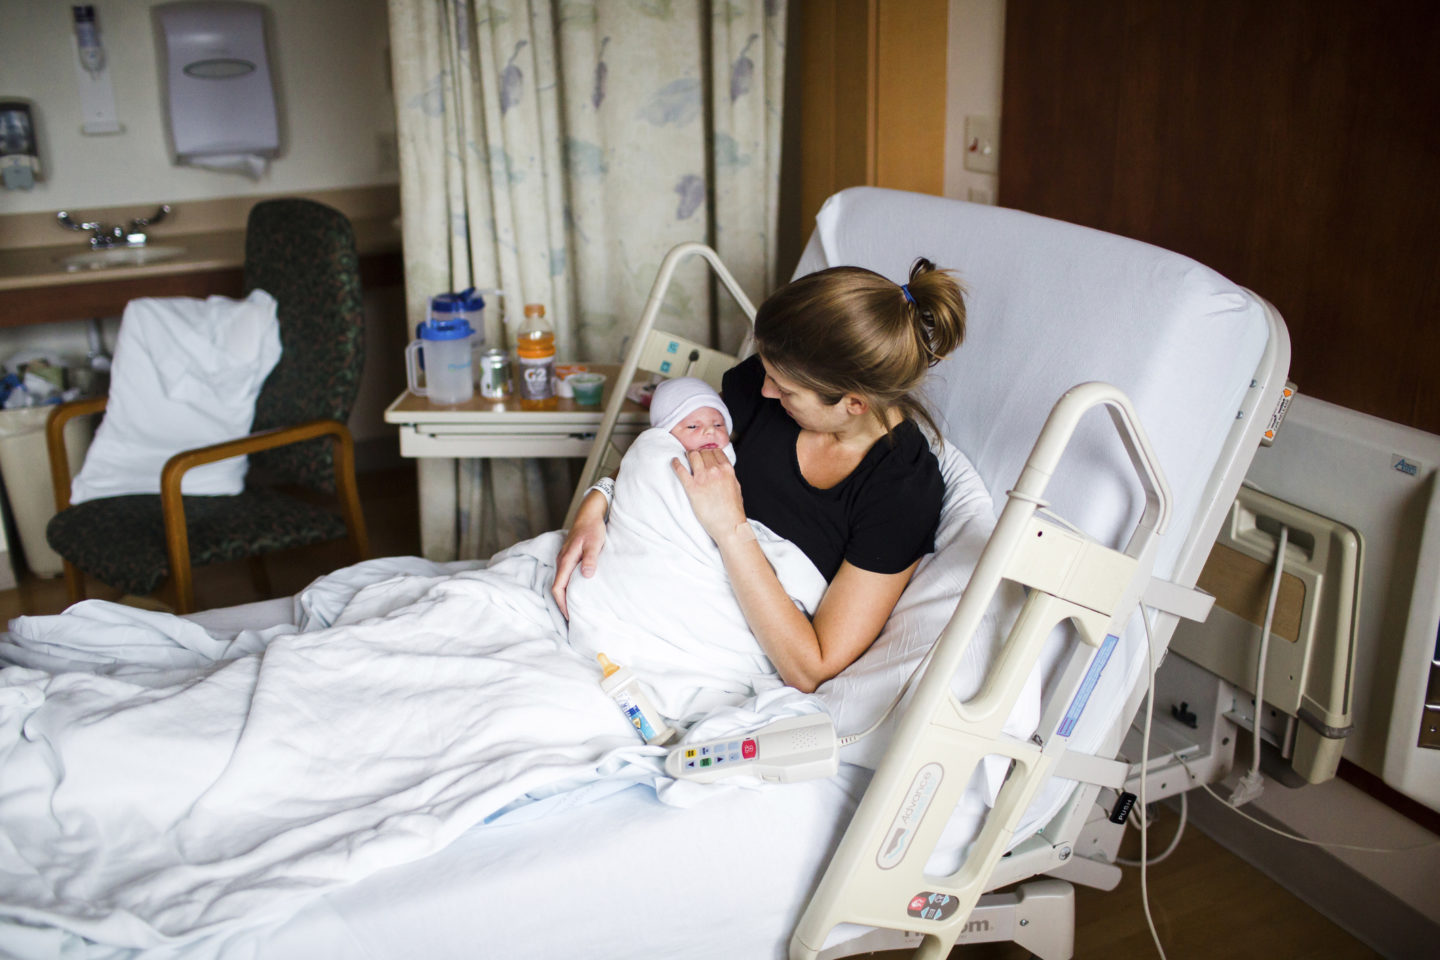 4 Maternity Stay Hassles No One Tells You About (Even Though Someone Should)